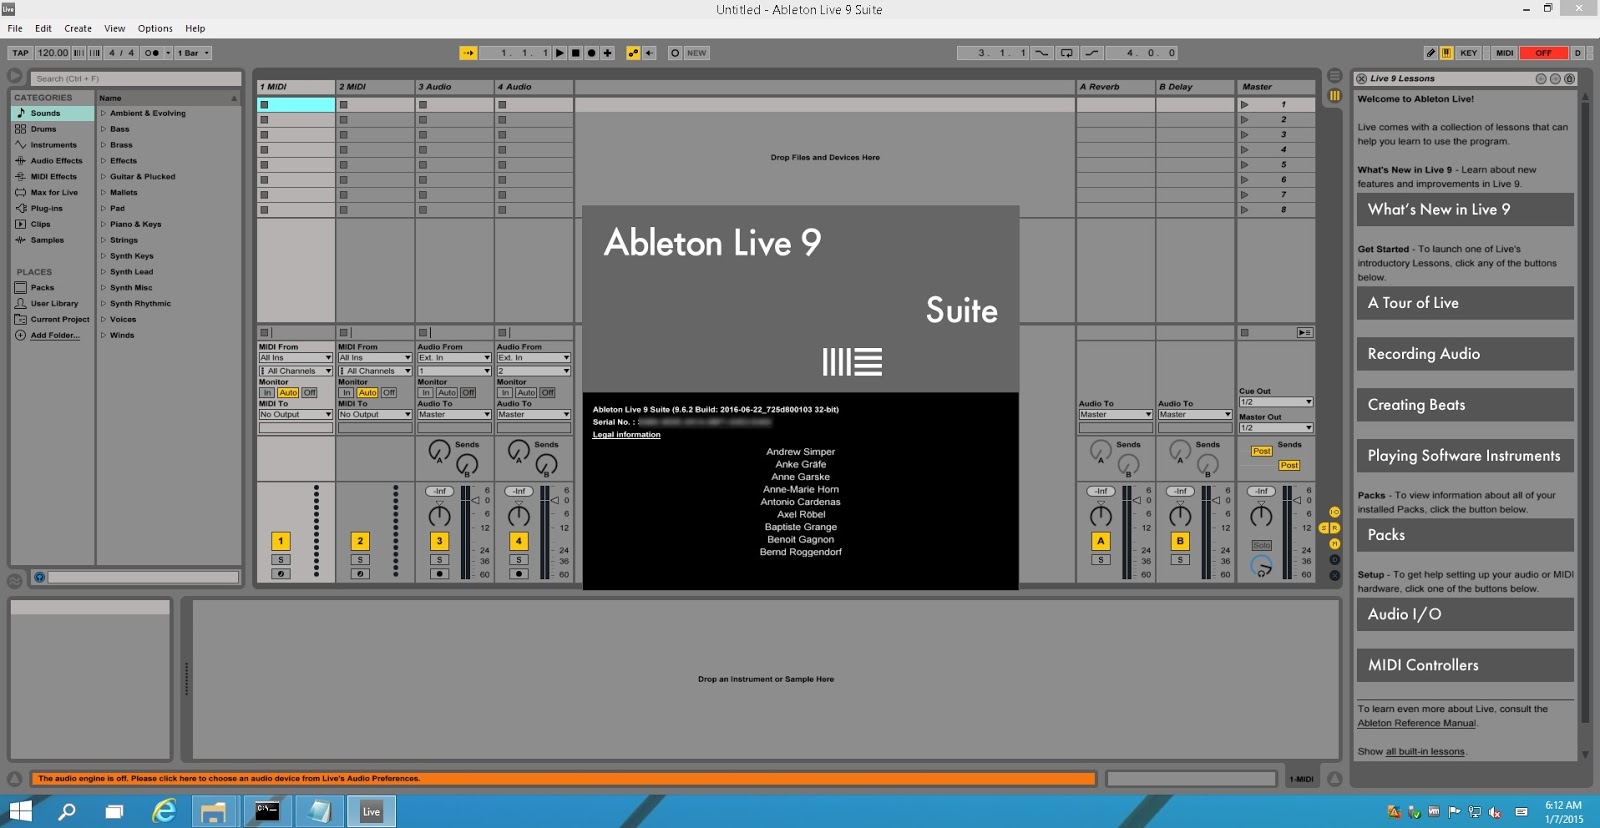 ableton live for mac 10.9.5